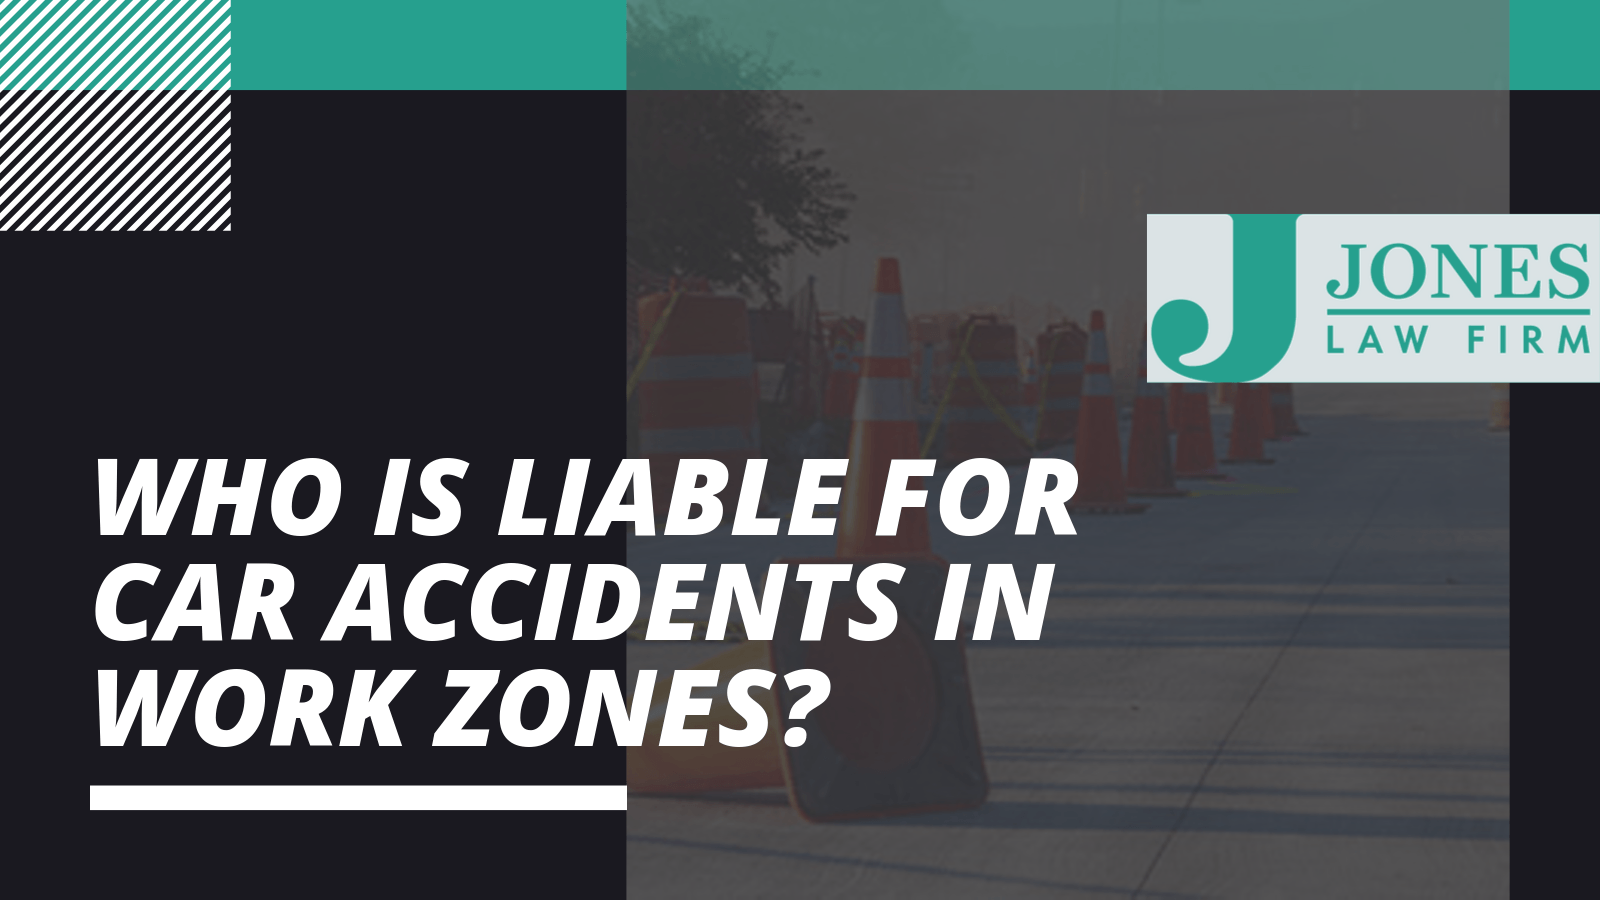 Who is Liable for Car Accidents in Work Zones? Jones Law Firm